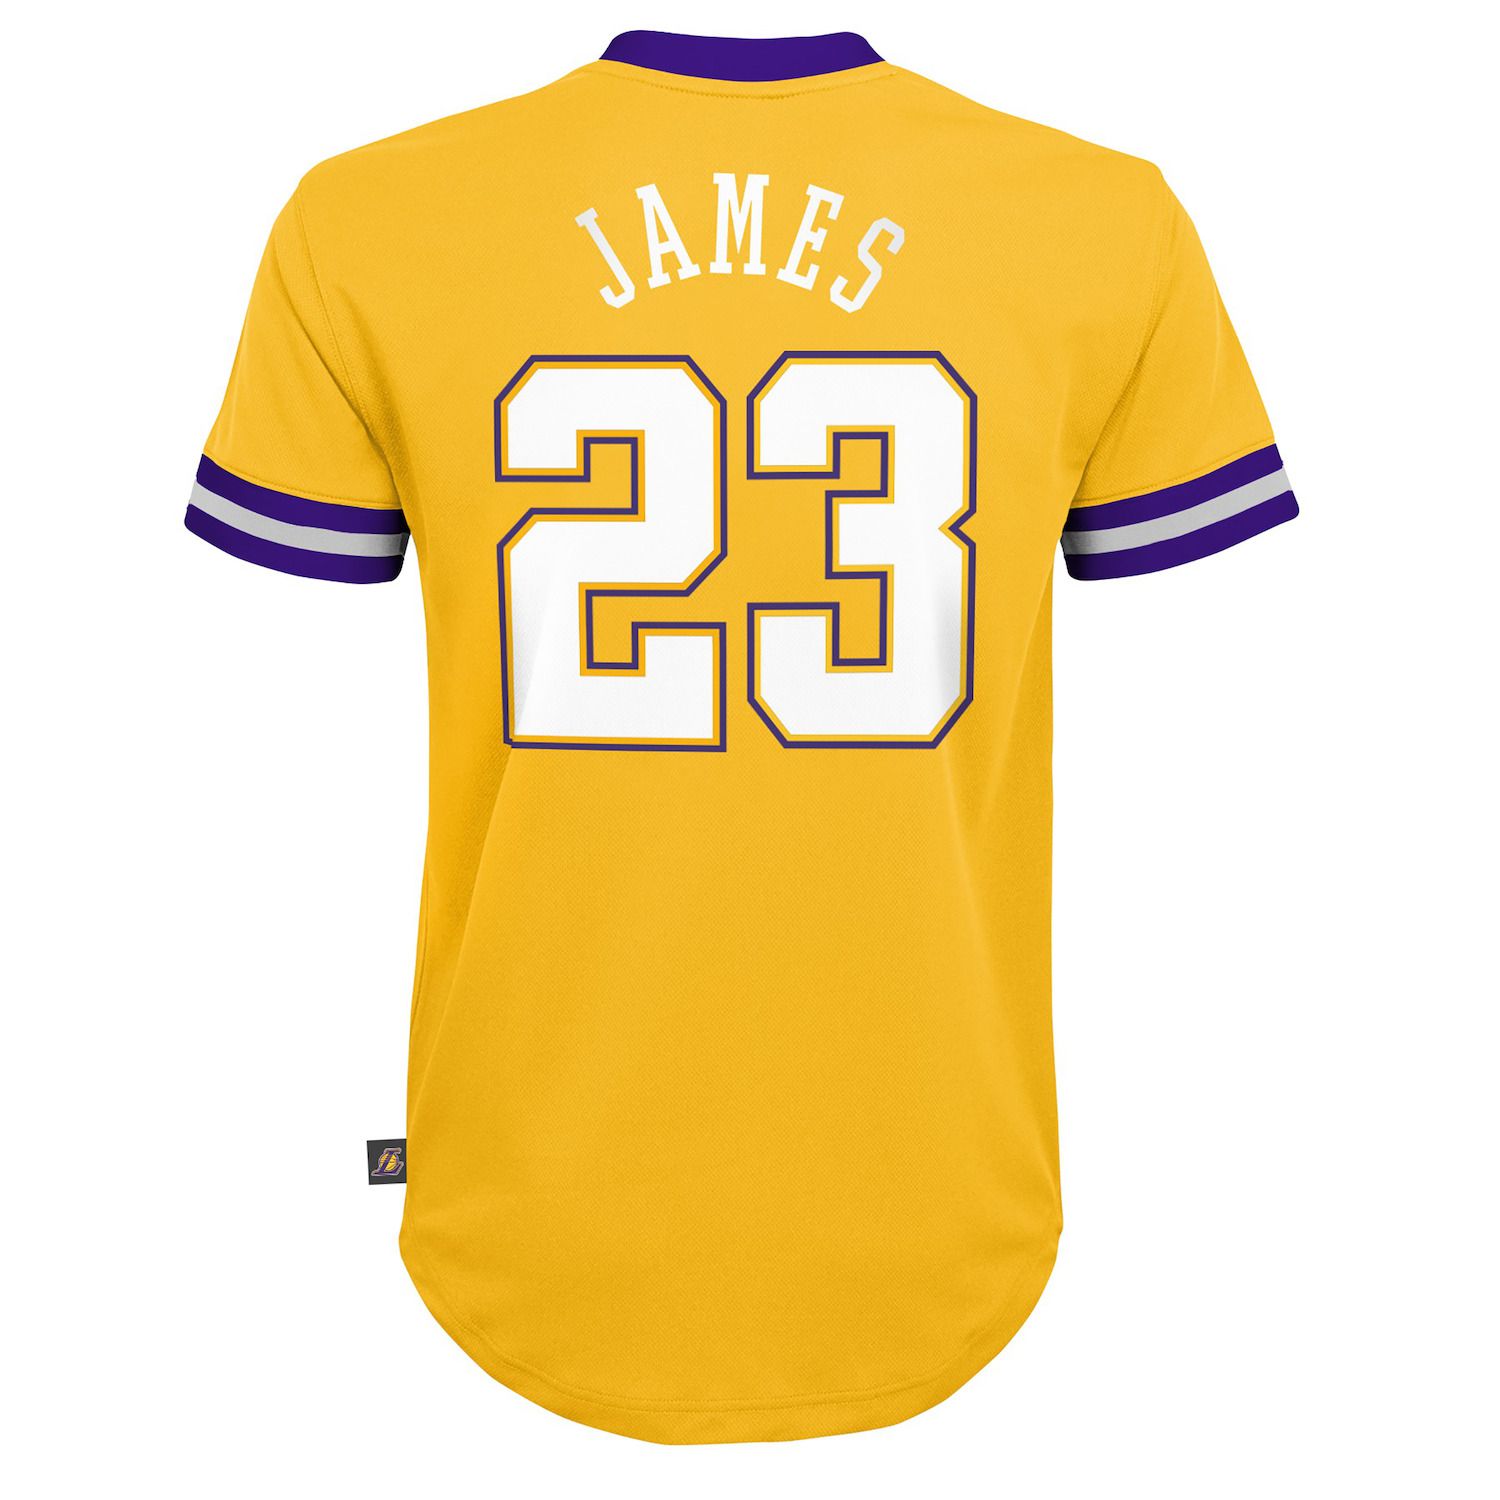 los angeles lakers replica jersey